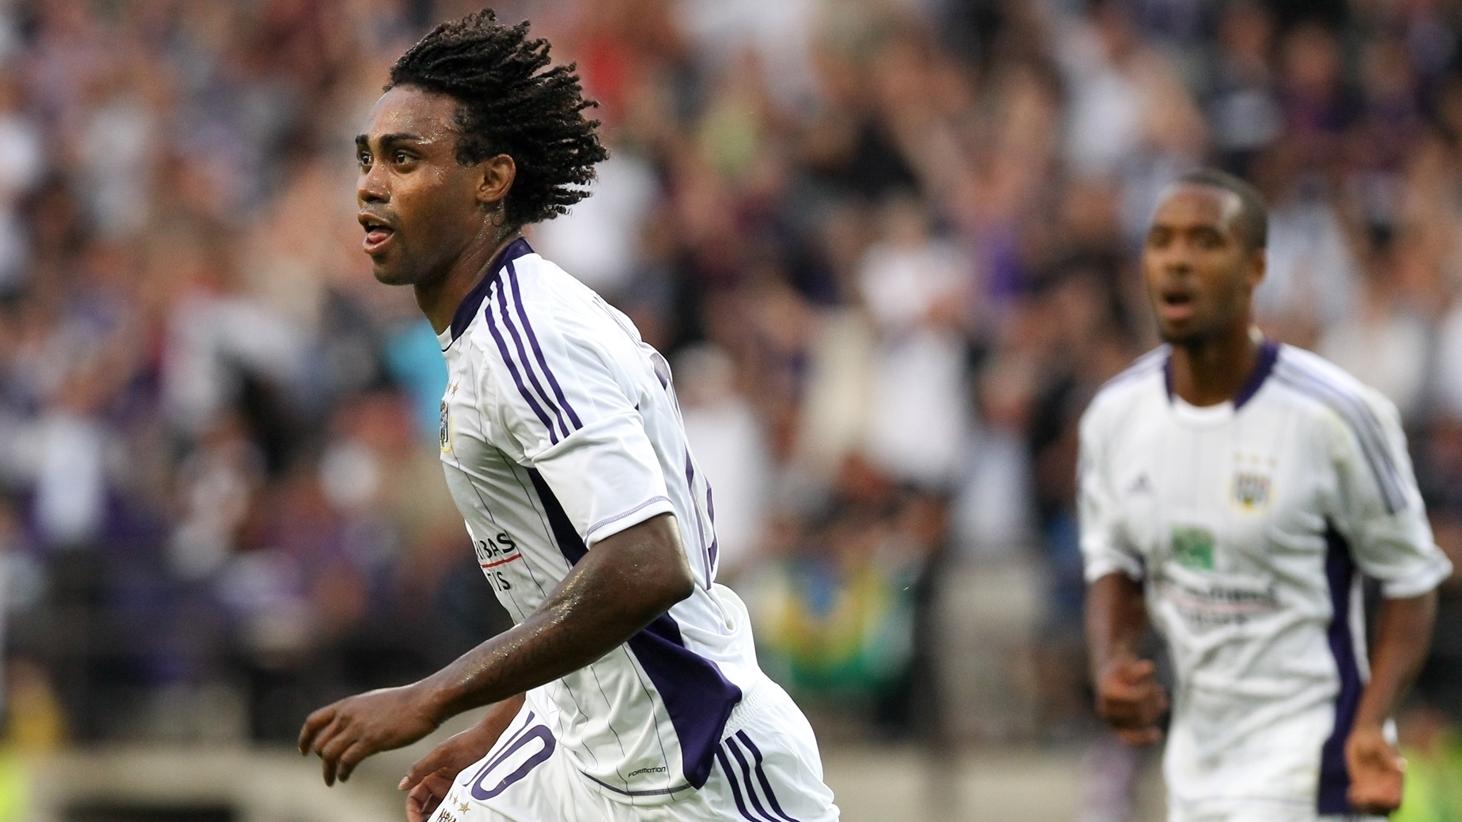 Anderlecht hit five to move in on play-offs, UEFA Champions League